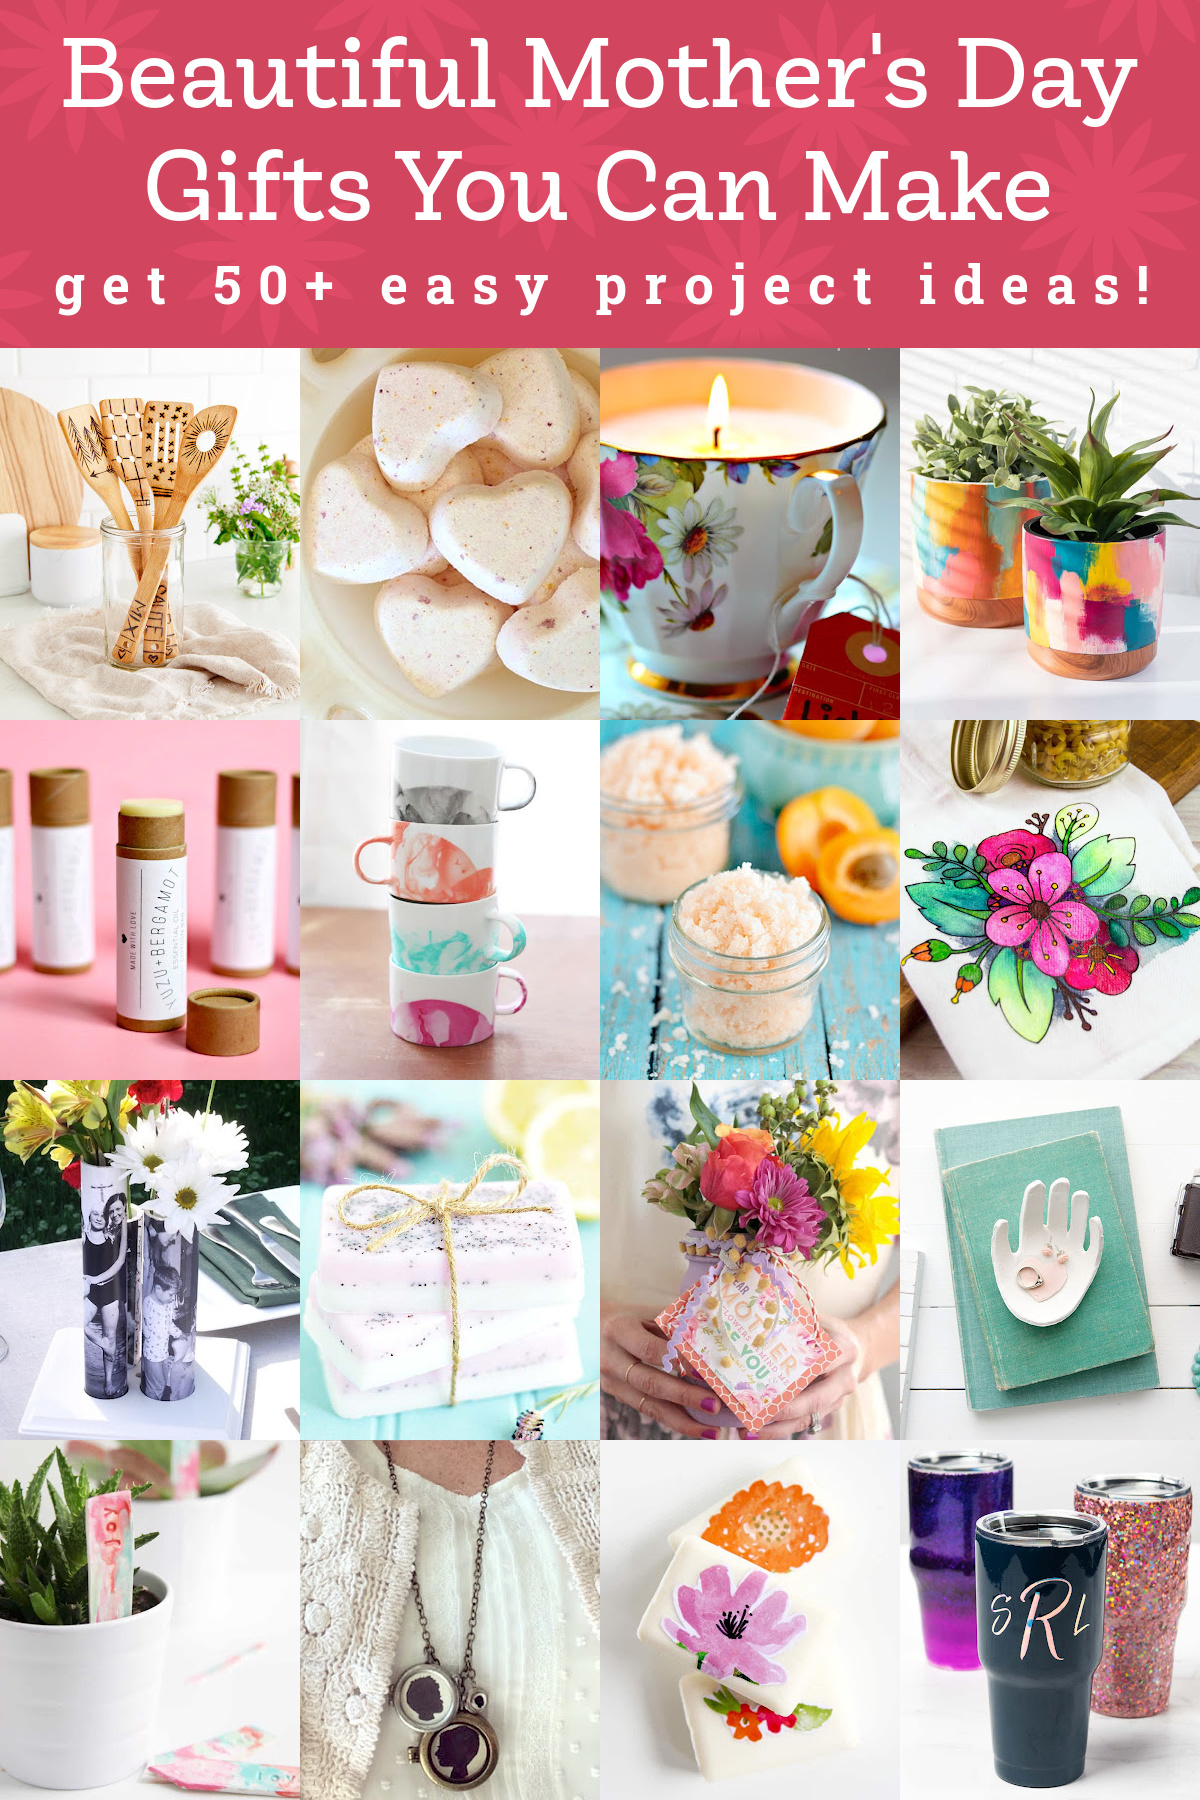 Homemade Mother's Day Gifts She'll Love